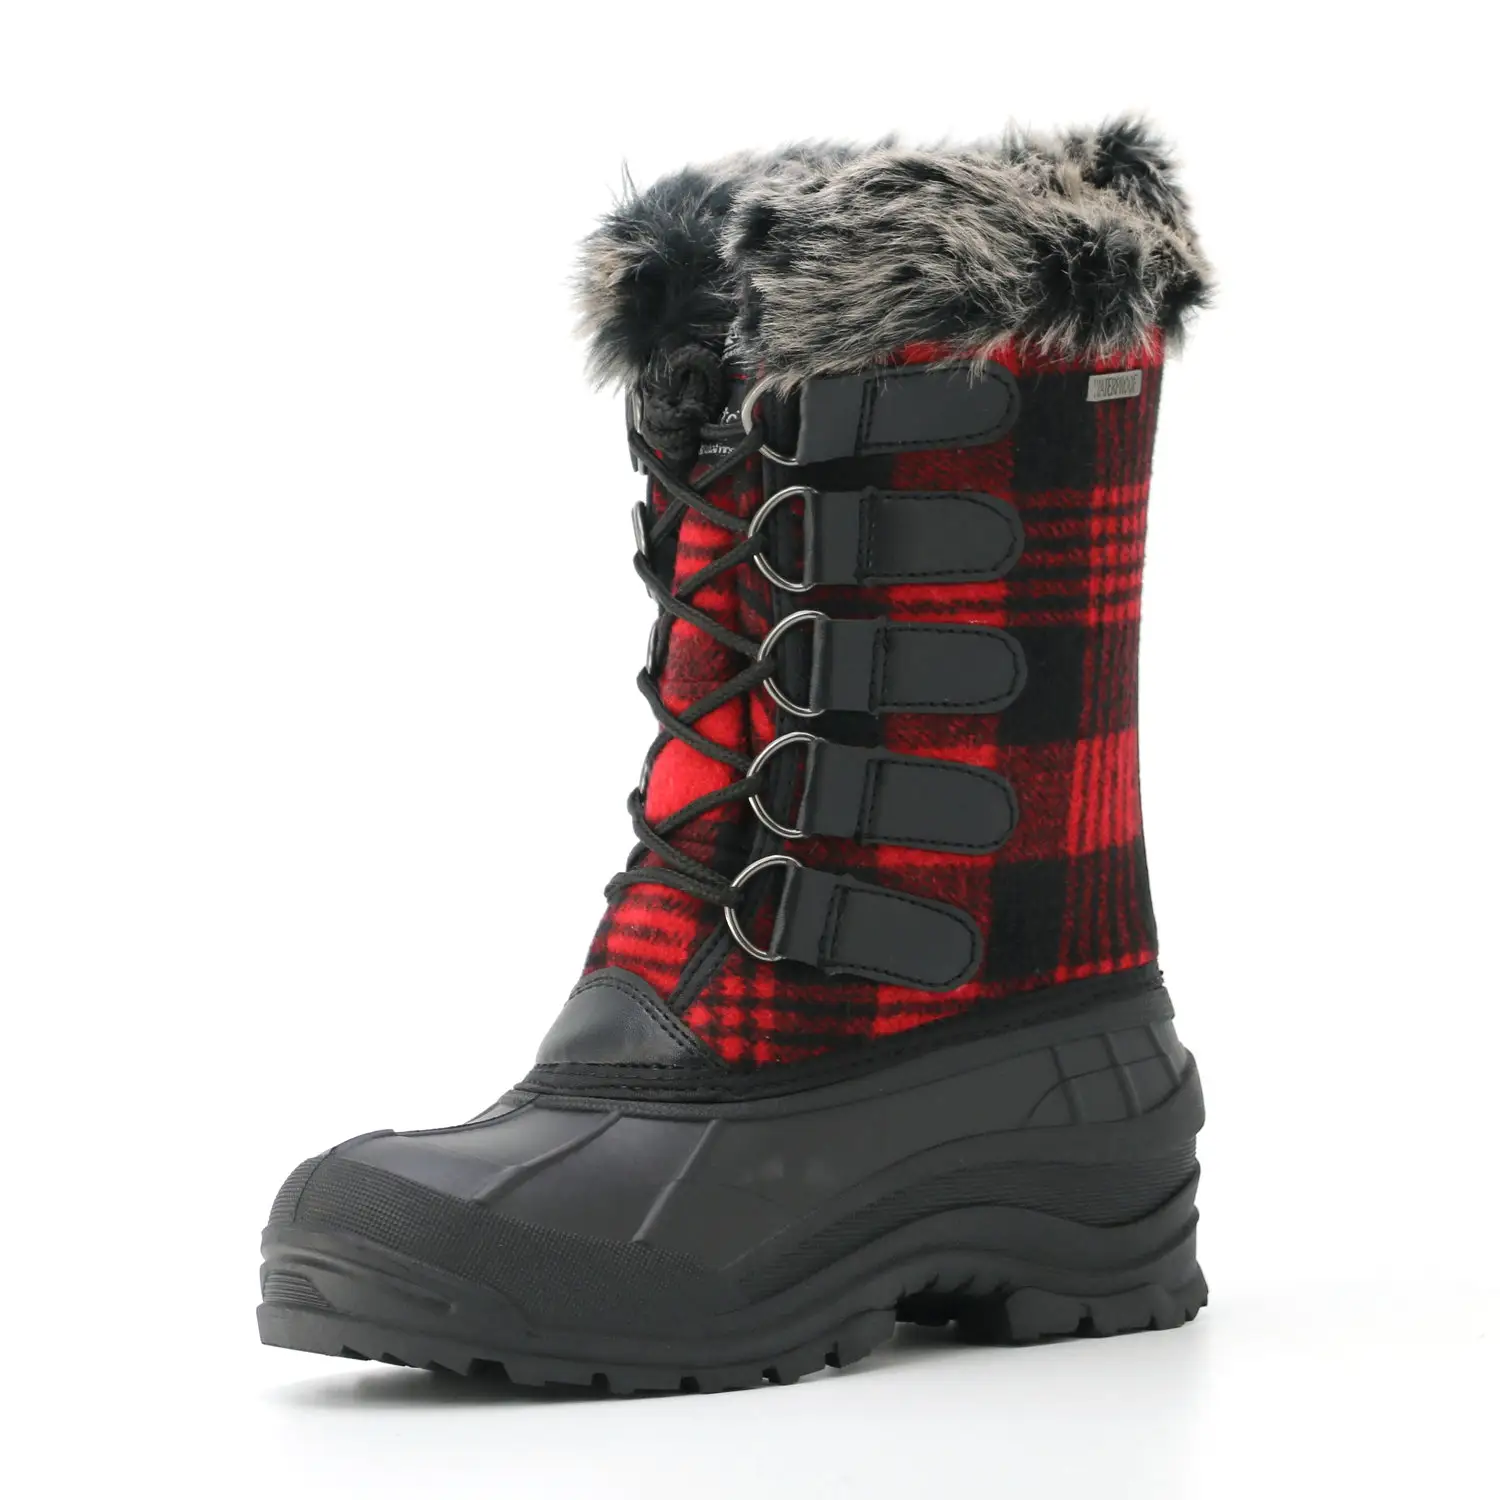 Women Furry Winter Snow Boots fur lined snow boots Non-slip Outsole Lace Up snow boots